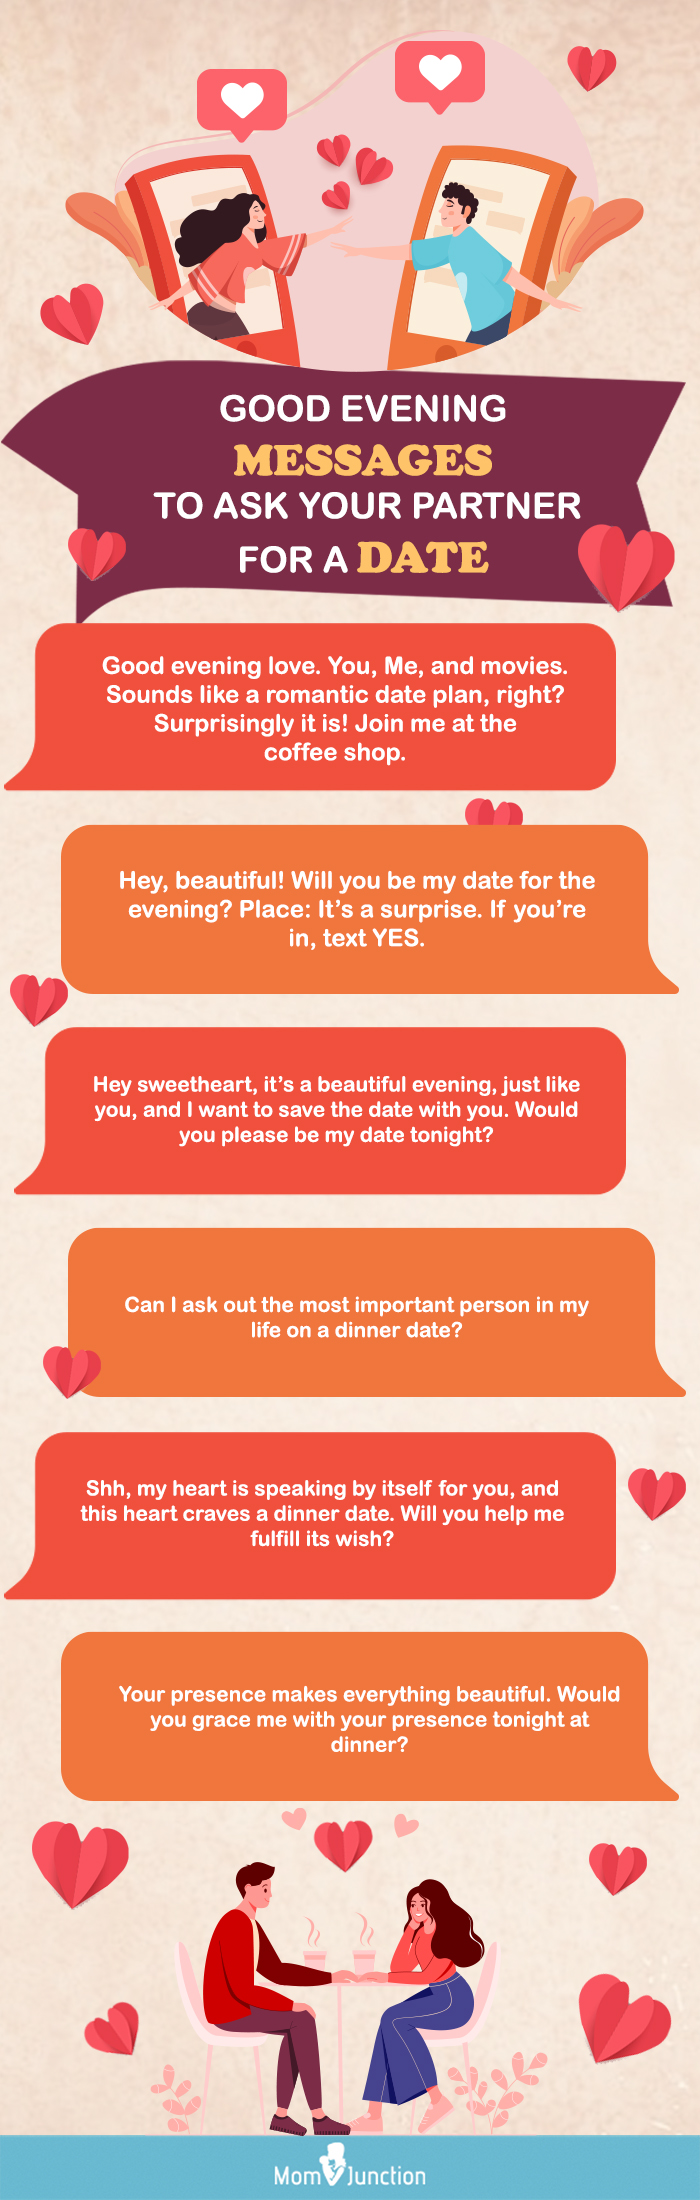 good evening love messages to ask for a date (infographic)